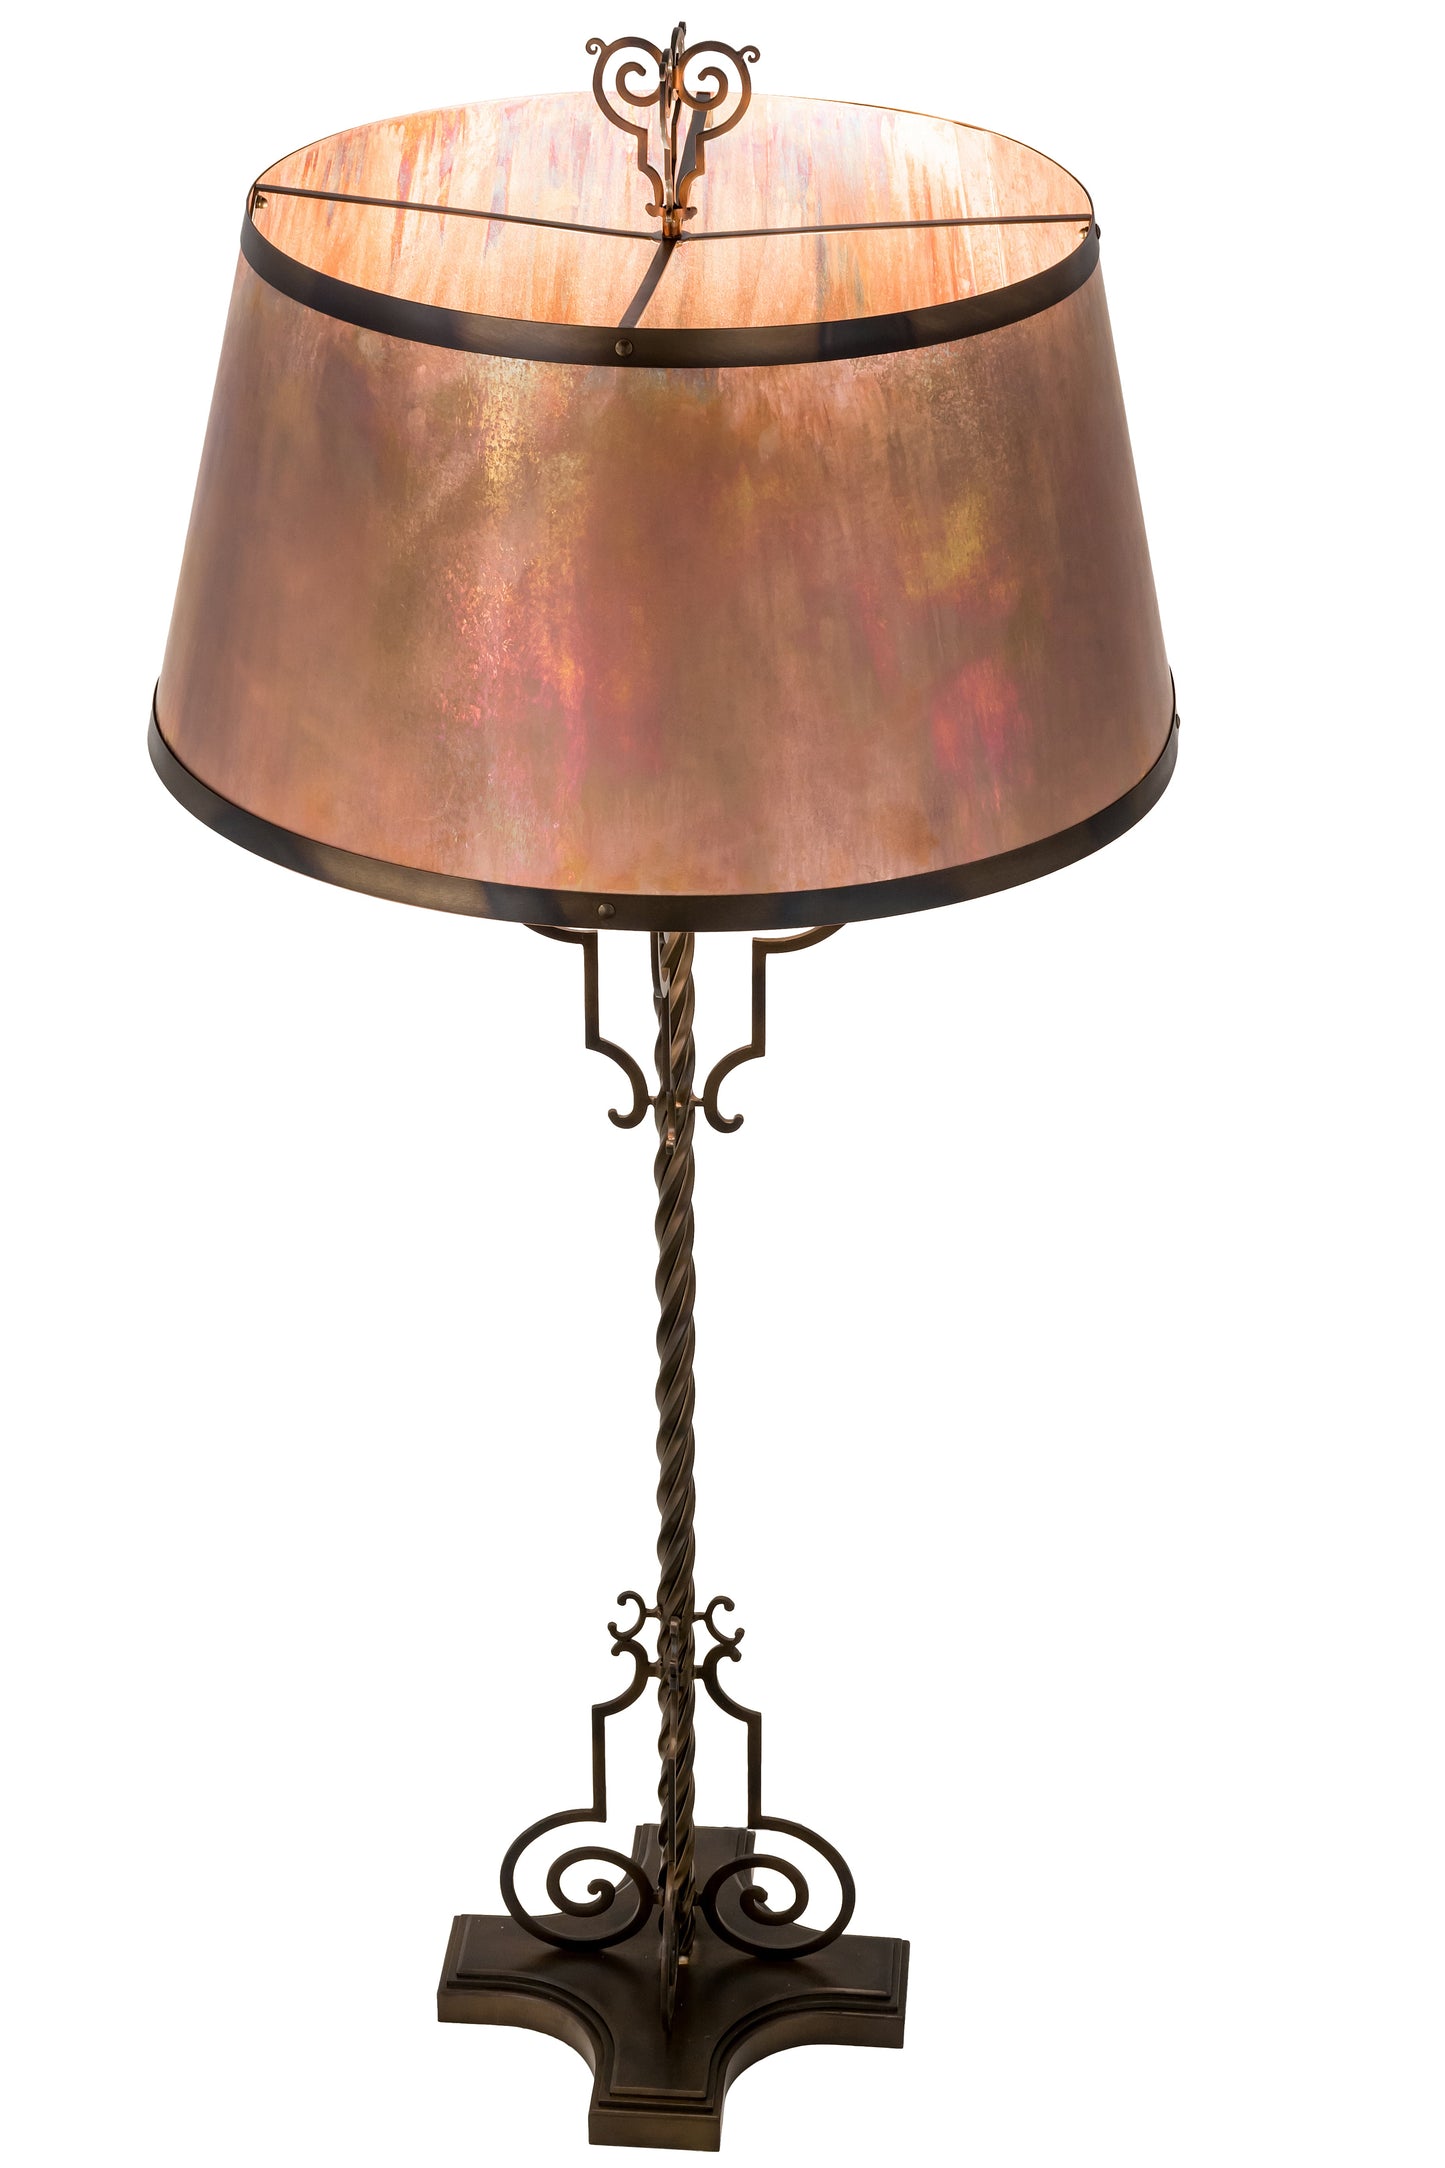 72" Clarice Floor Lamp by 2nd Ave Lighting